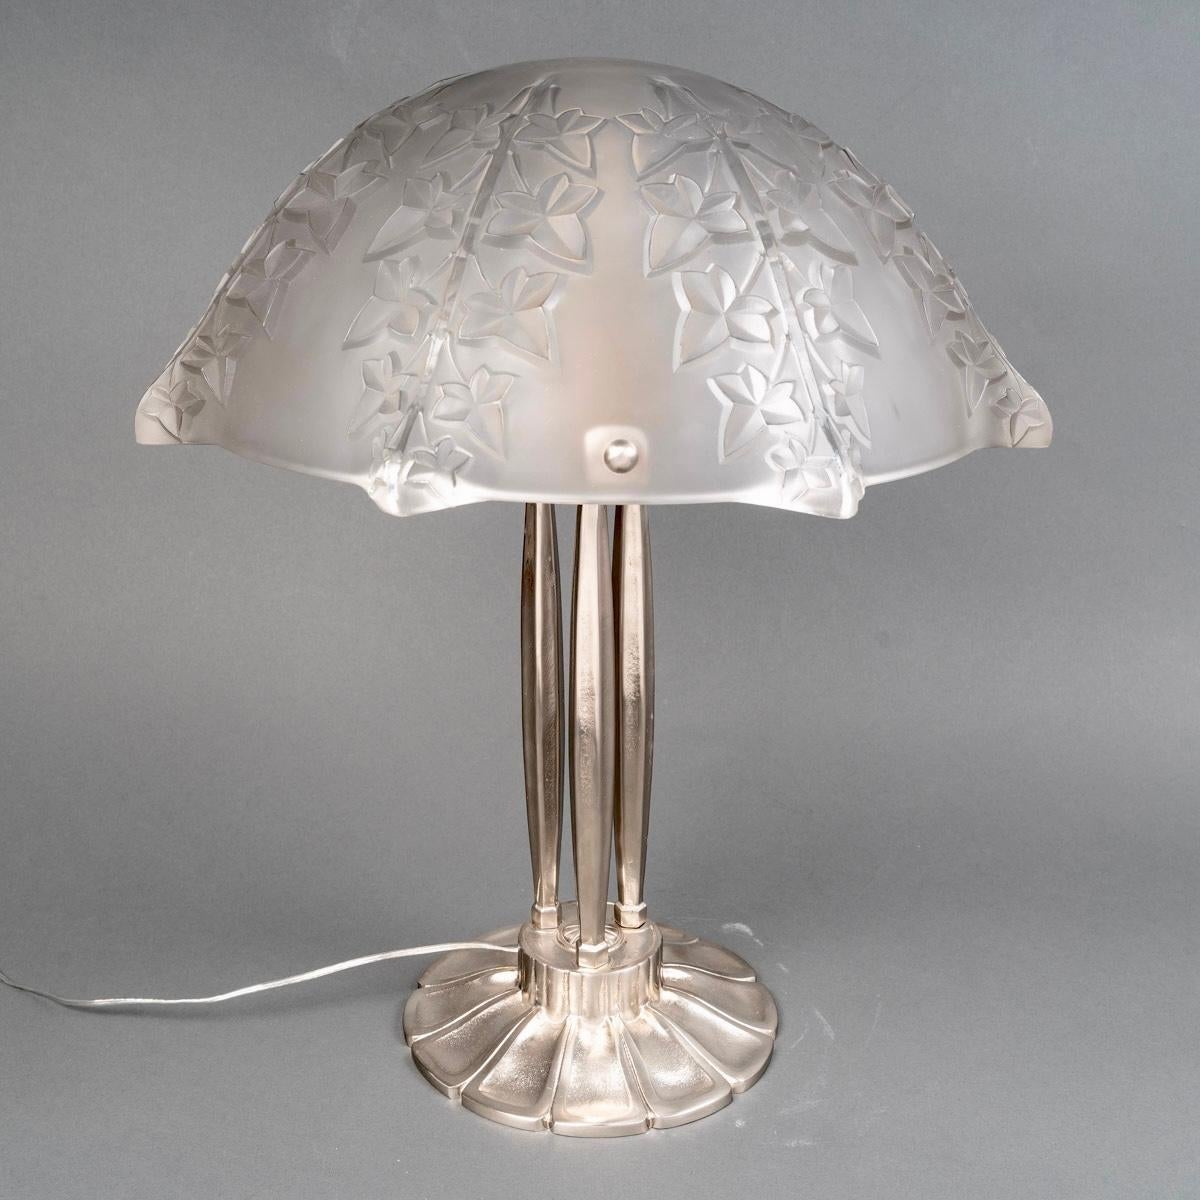 Molded 1927 René Lalique - Pair Of Lamps Lierre Ivy Glass & Nickeled Bronze  For Sale